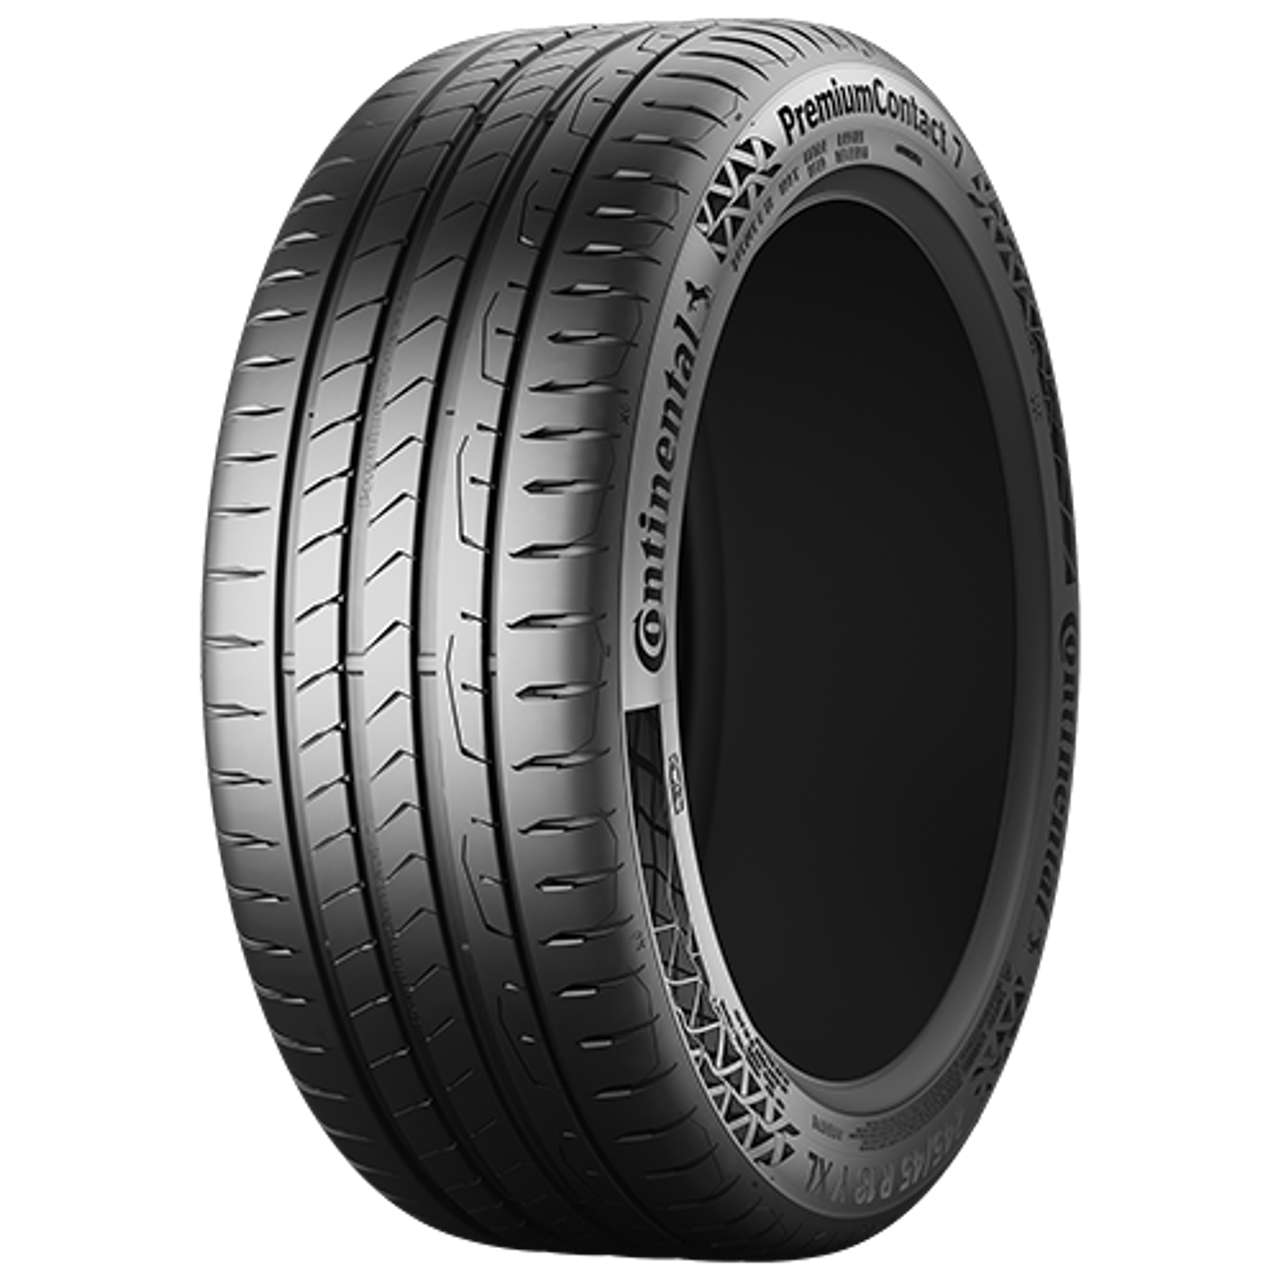 CONTINENTAL PREMIUMCONTACT 7 (EVc) 225/45R17 91W FR BSW